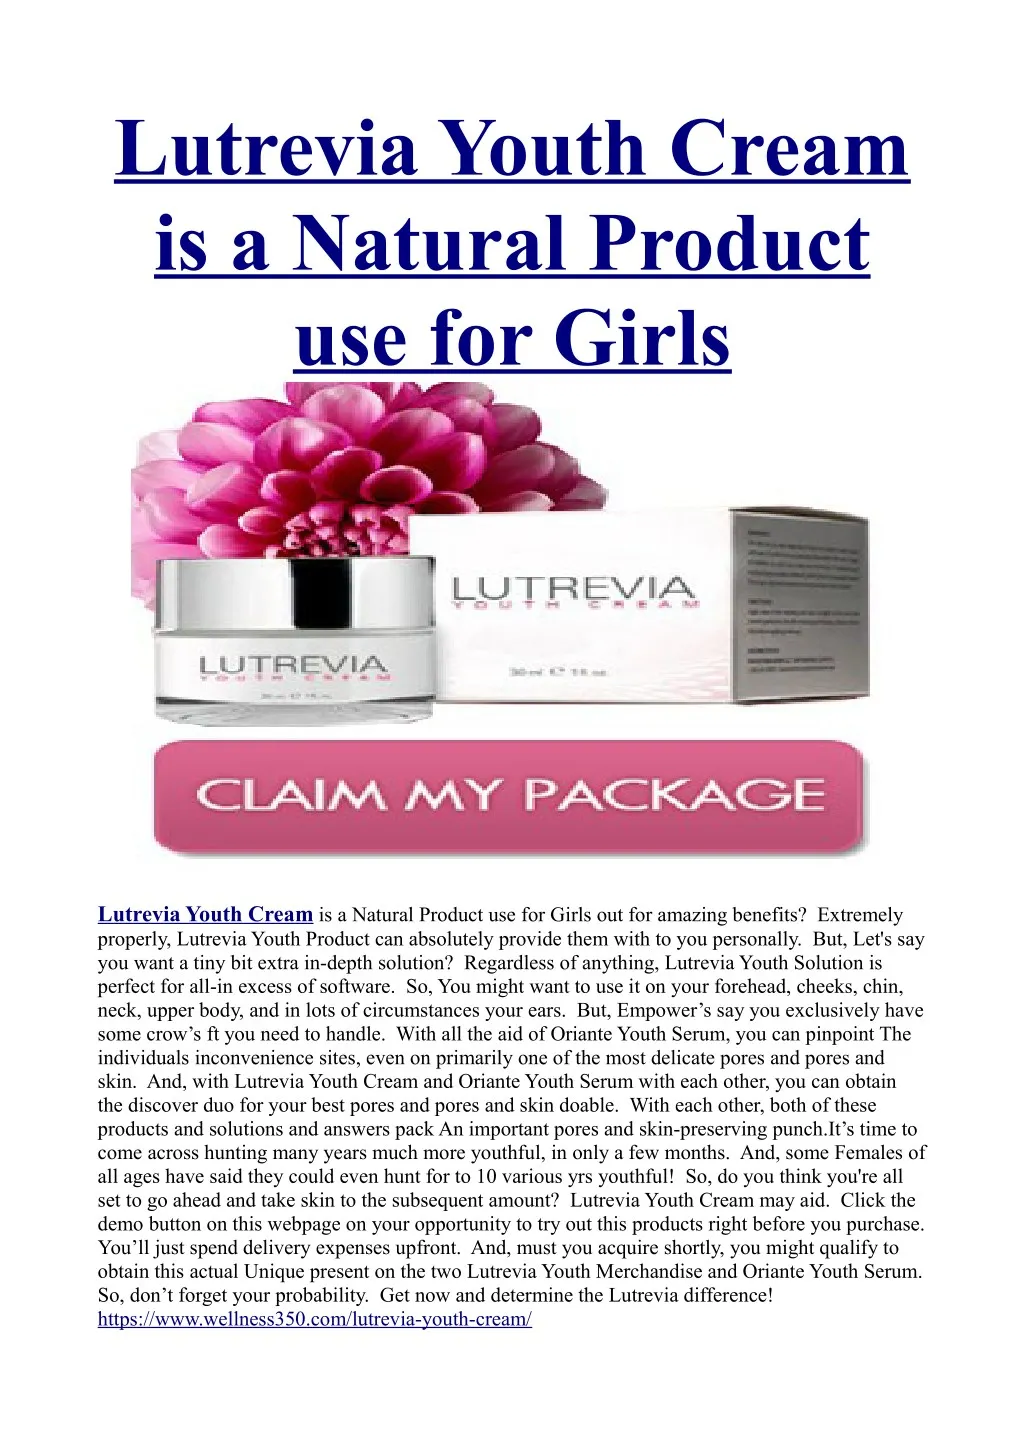 lutrevia youth cream is a natural product